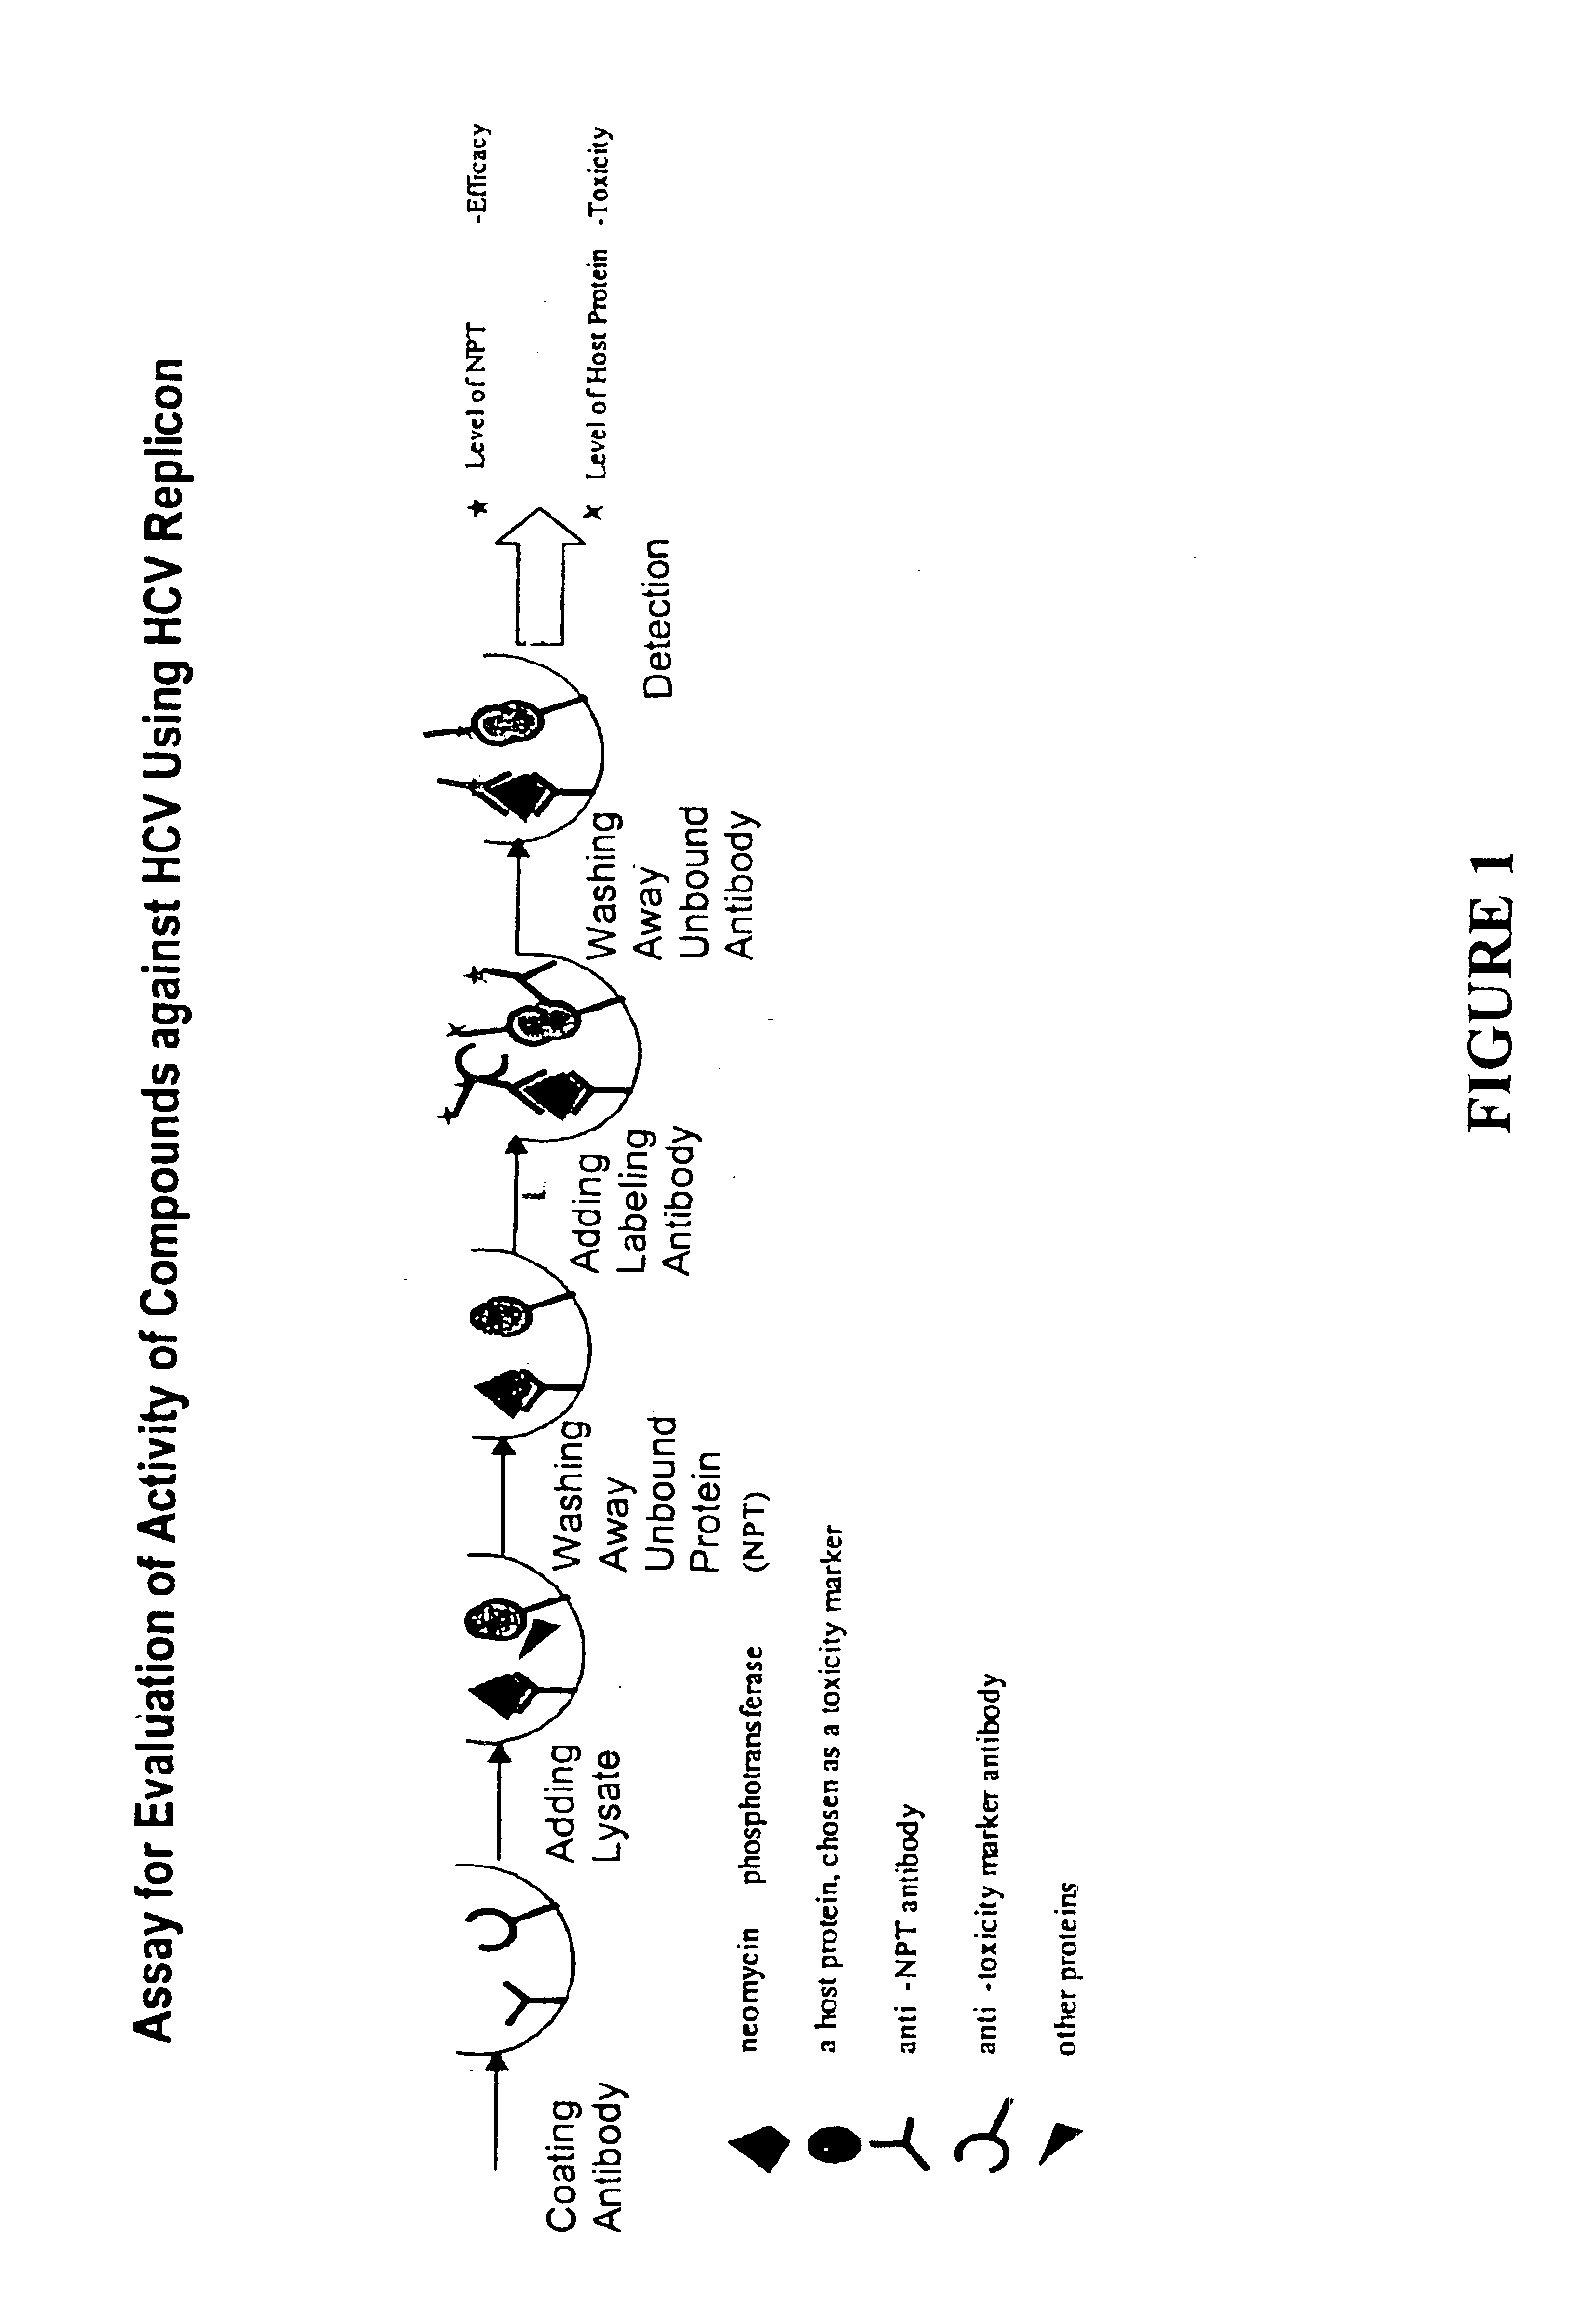 Substituted aryl thioureas and related compounds; inhibitors of viral replication